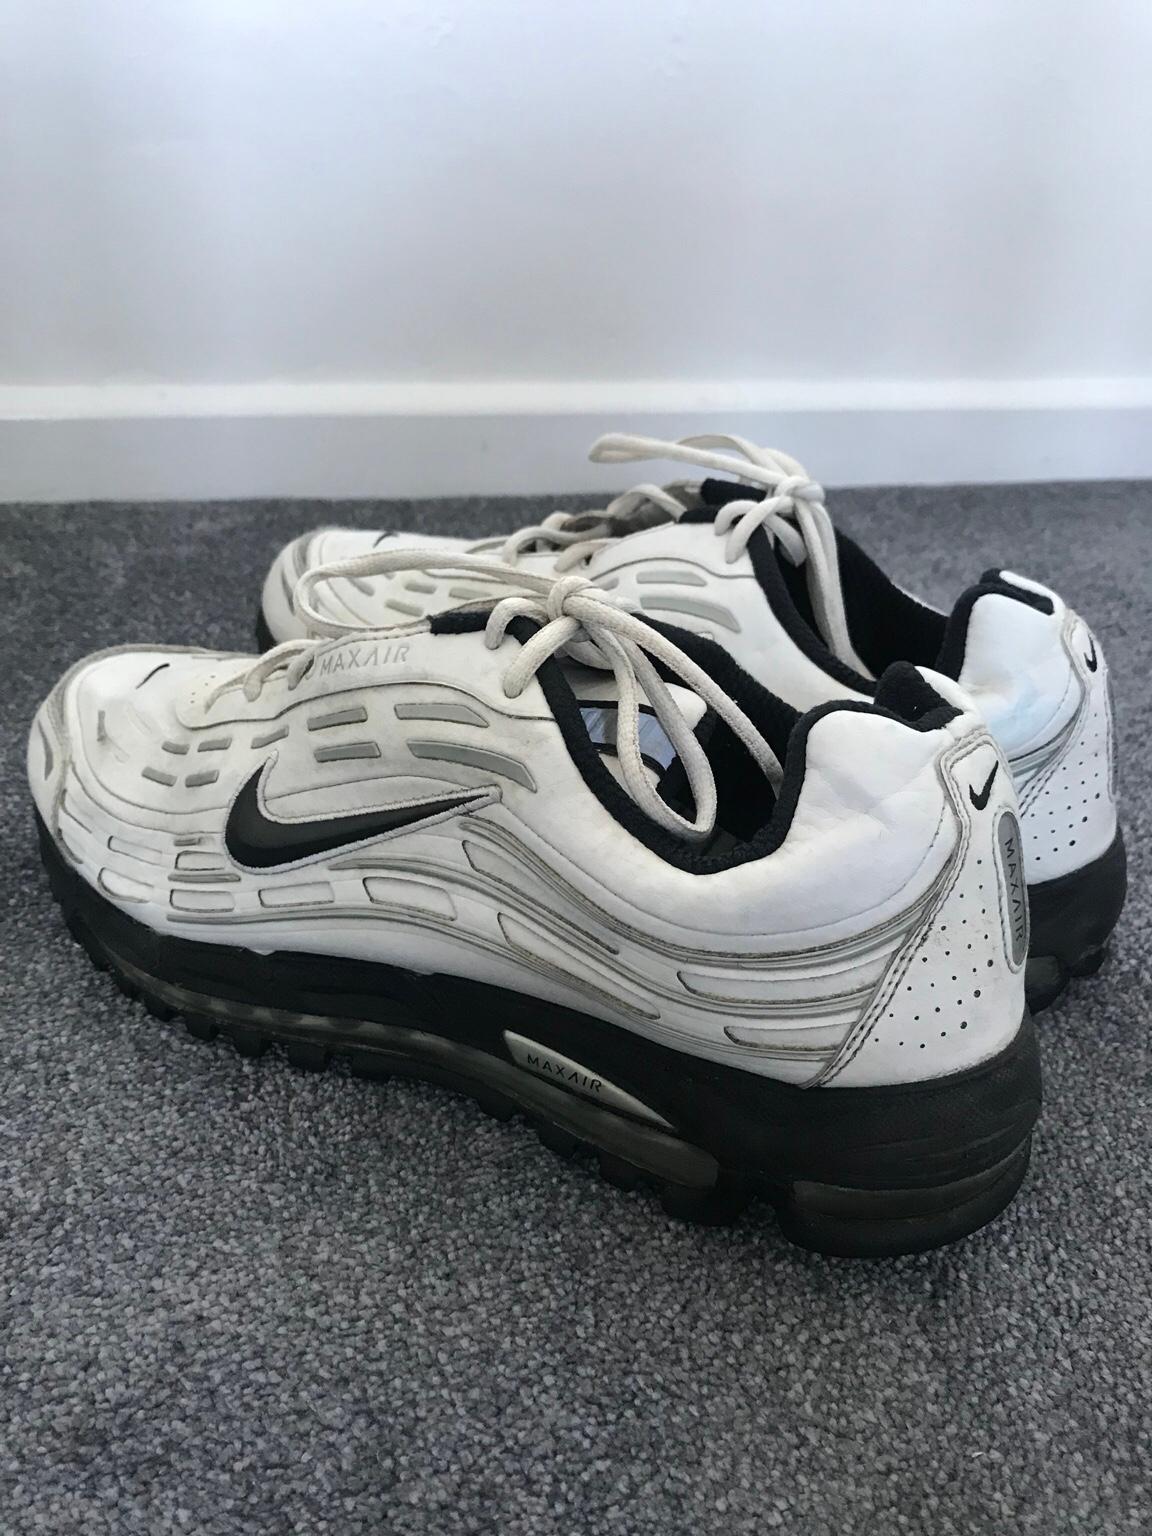 vintage Nike Air Max TL 2.5 (2006) UK 11 in E14 London for £110.00 for ...